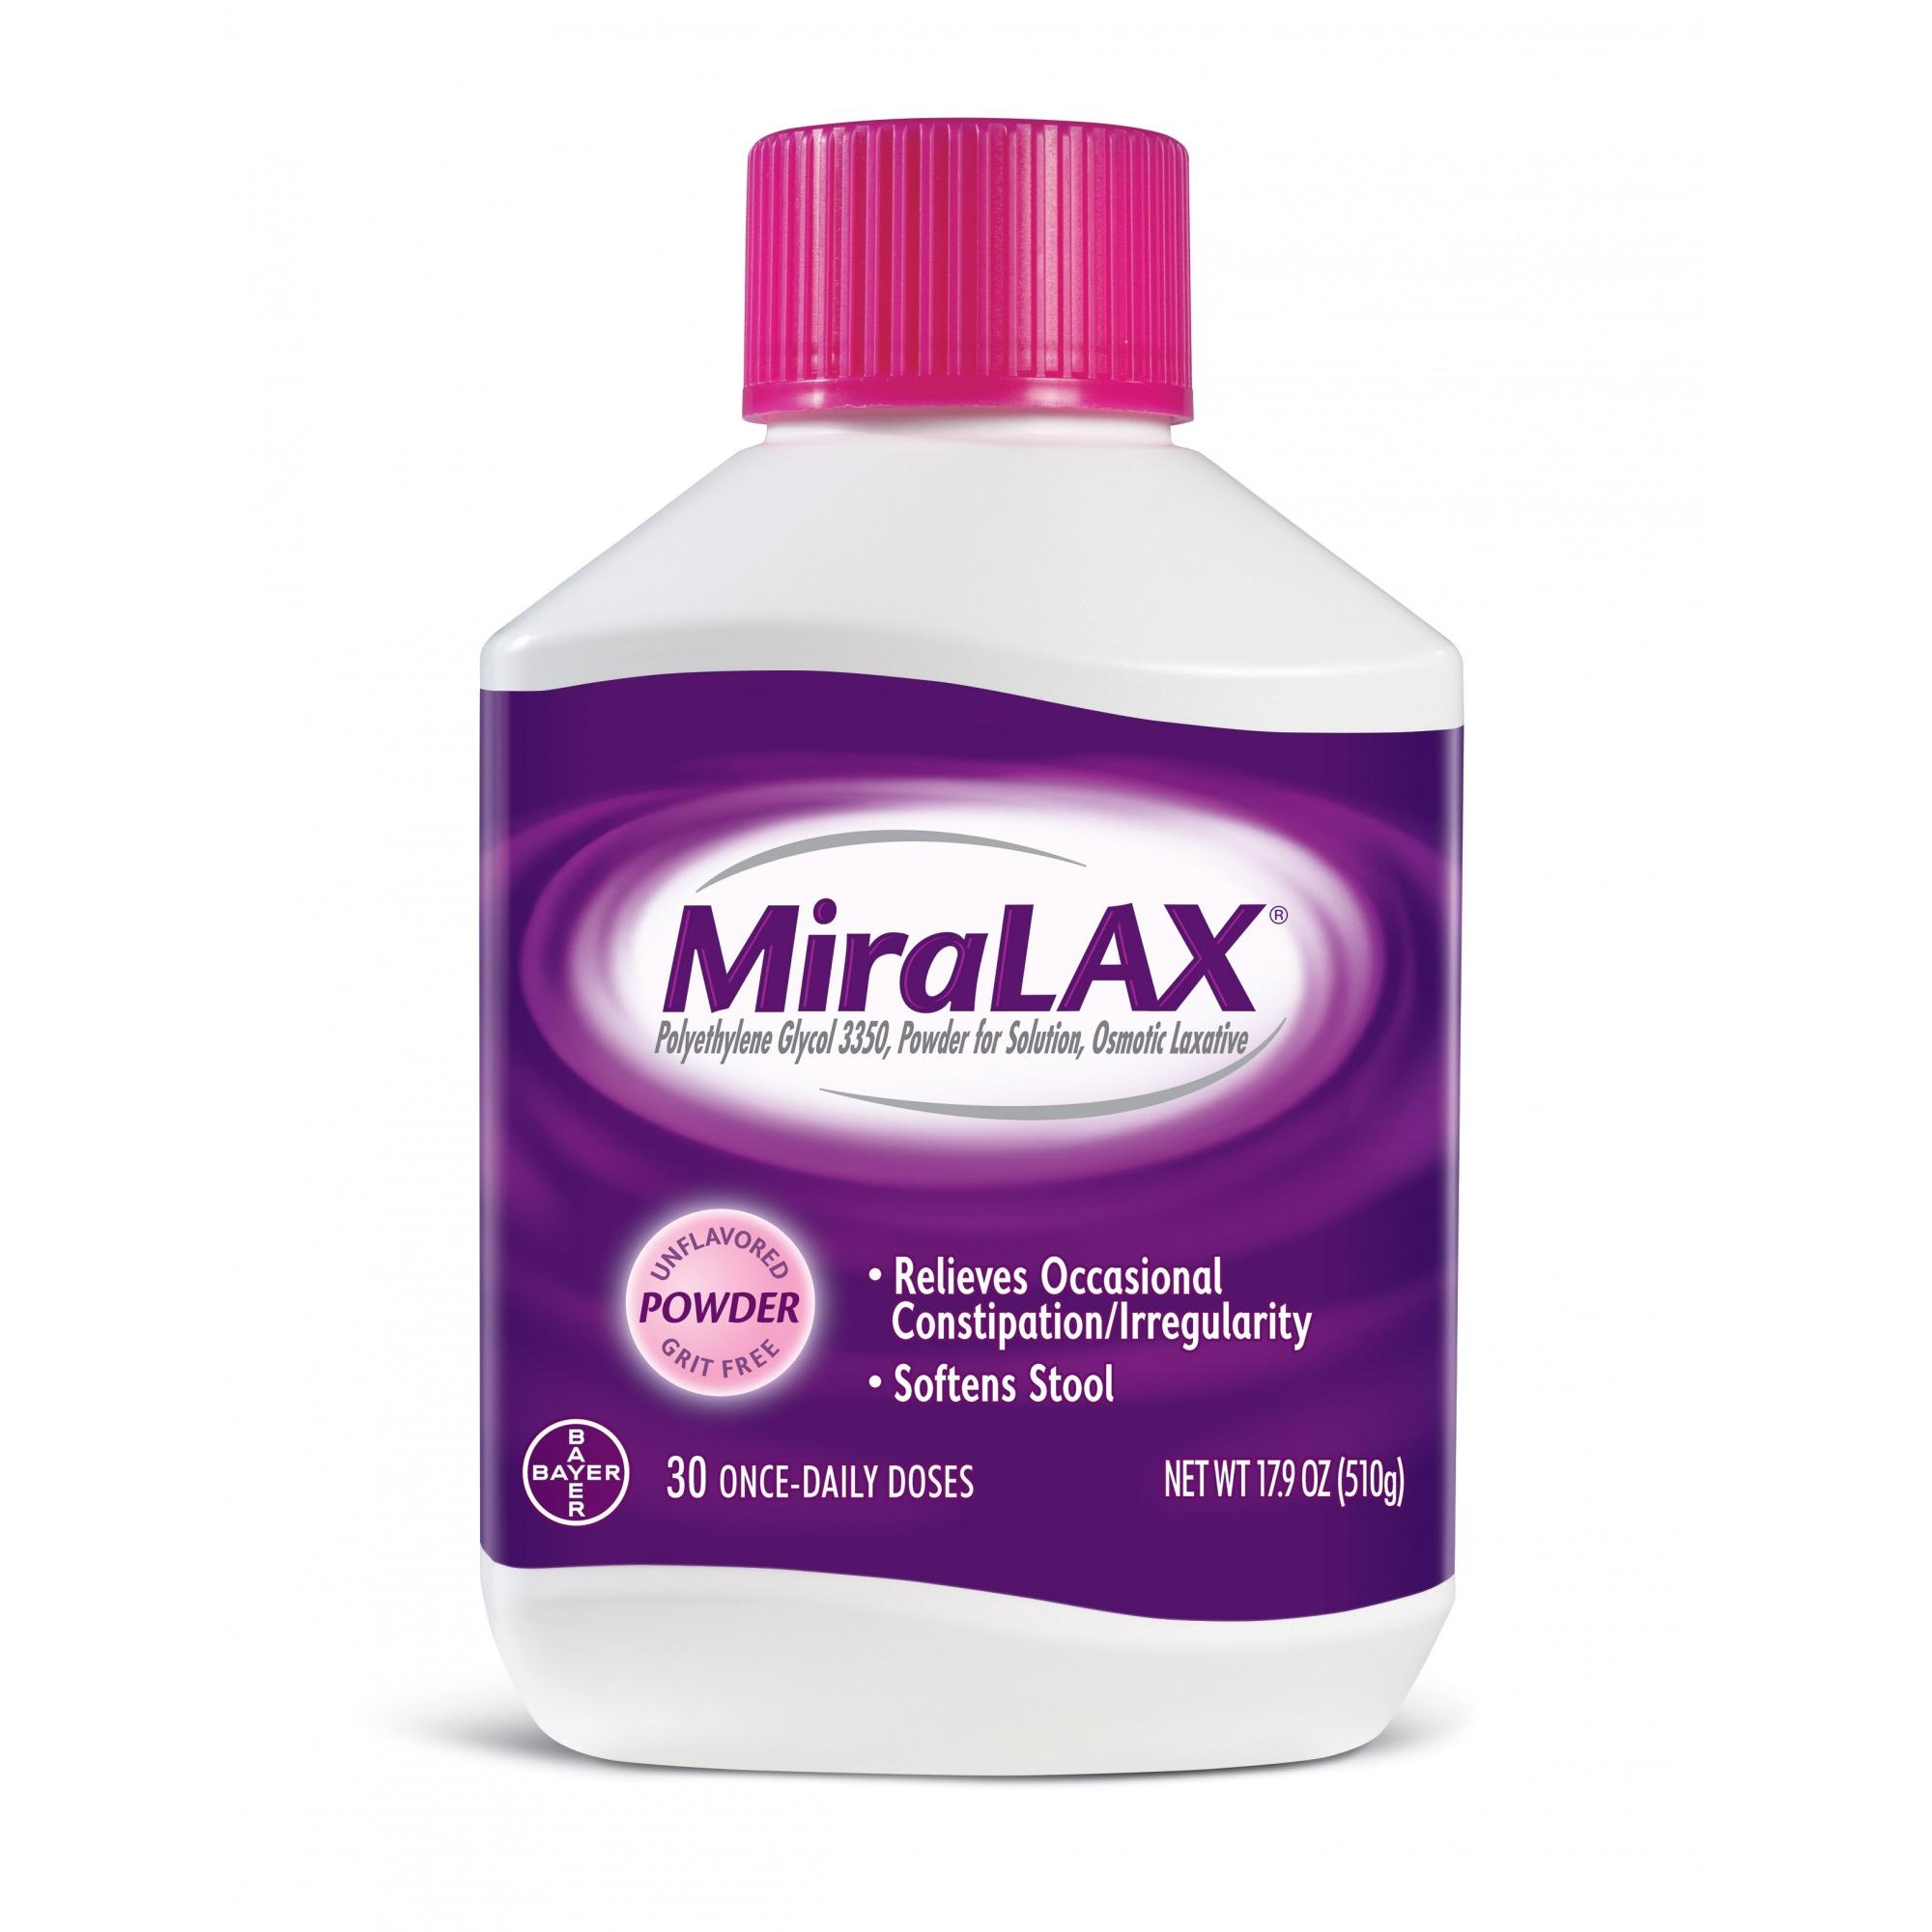 MiraLAX Laxative Powder for Gentle Constipation Relief, Stool Softener, 30 Doses - image 1 of 12